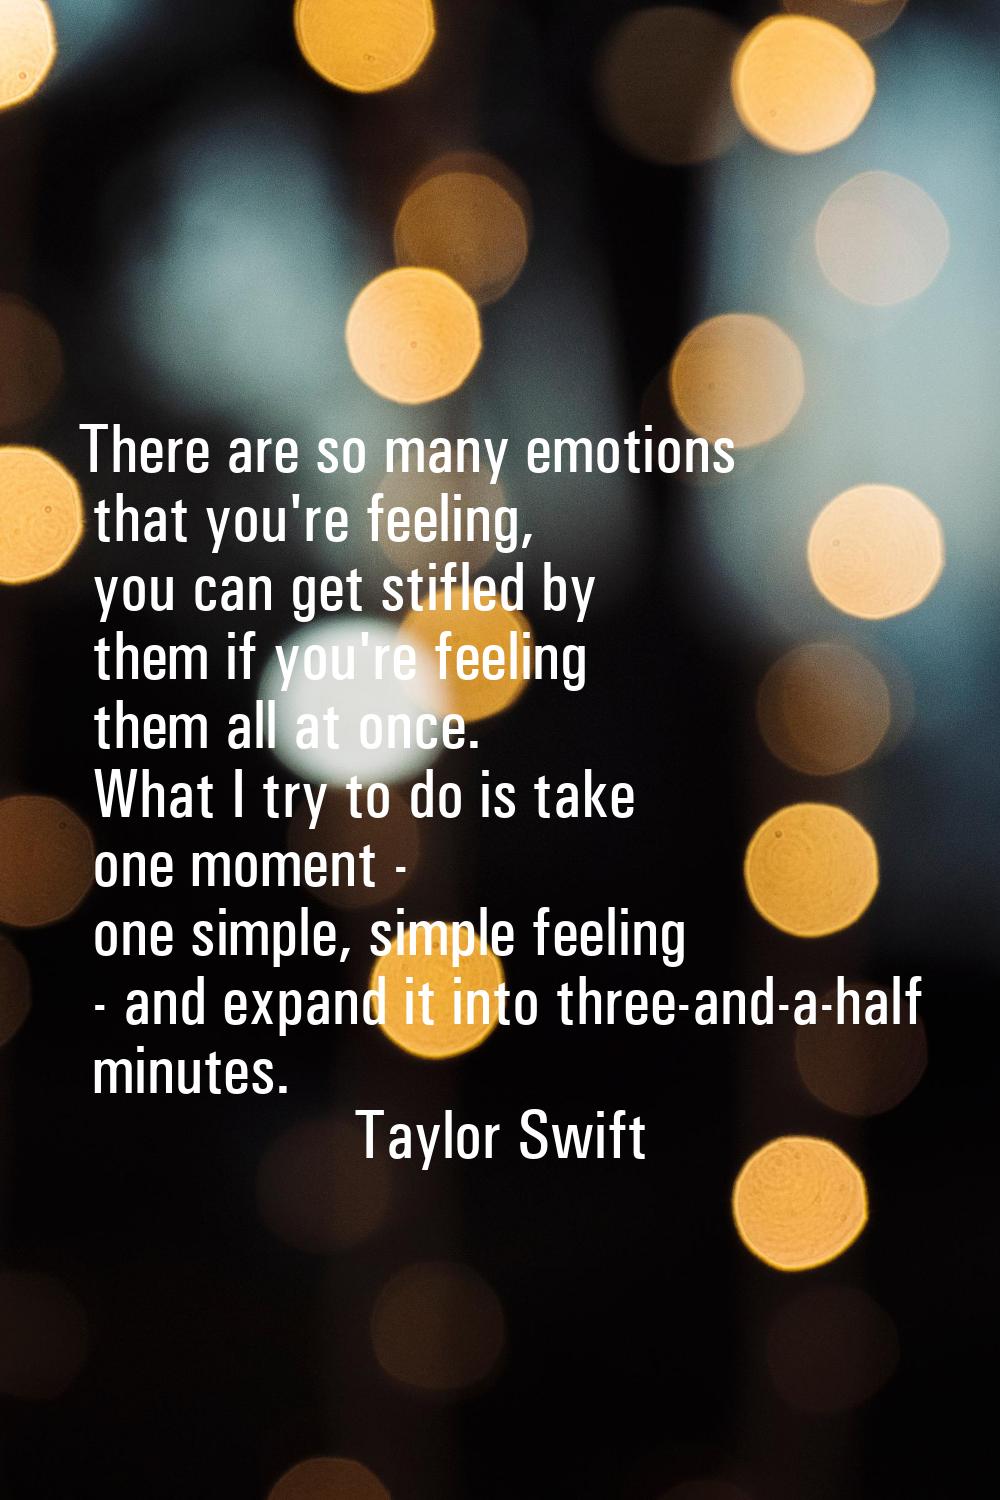 There are so many emotions that you're feeling, you can get stifled by them if you're feeling them 